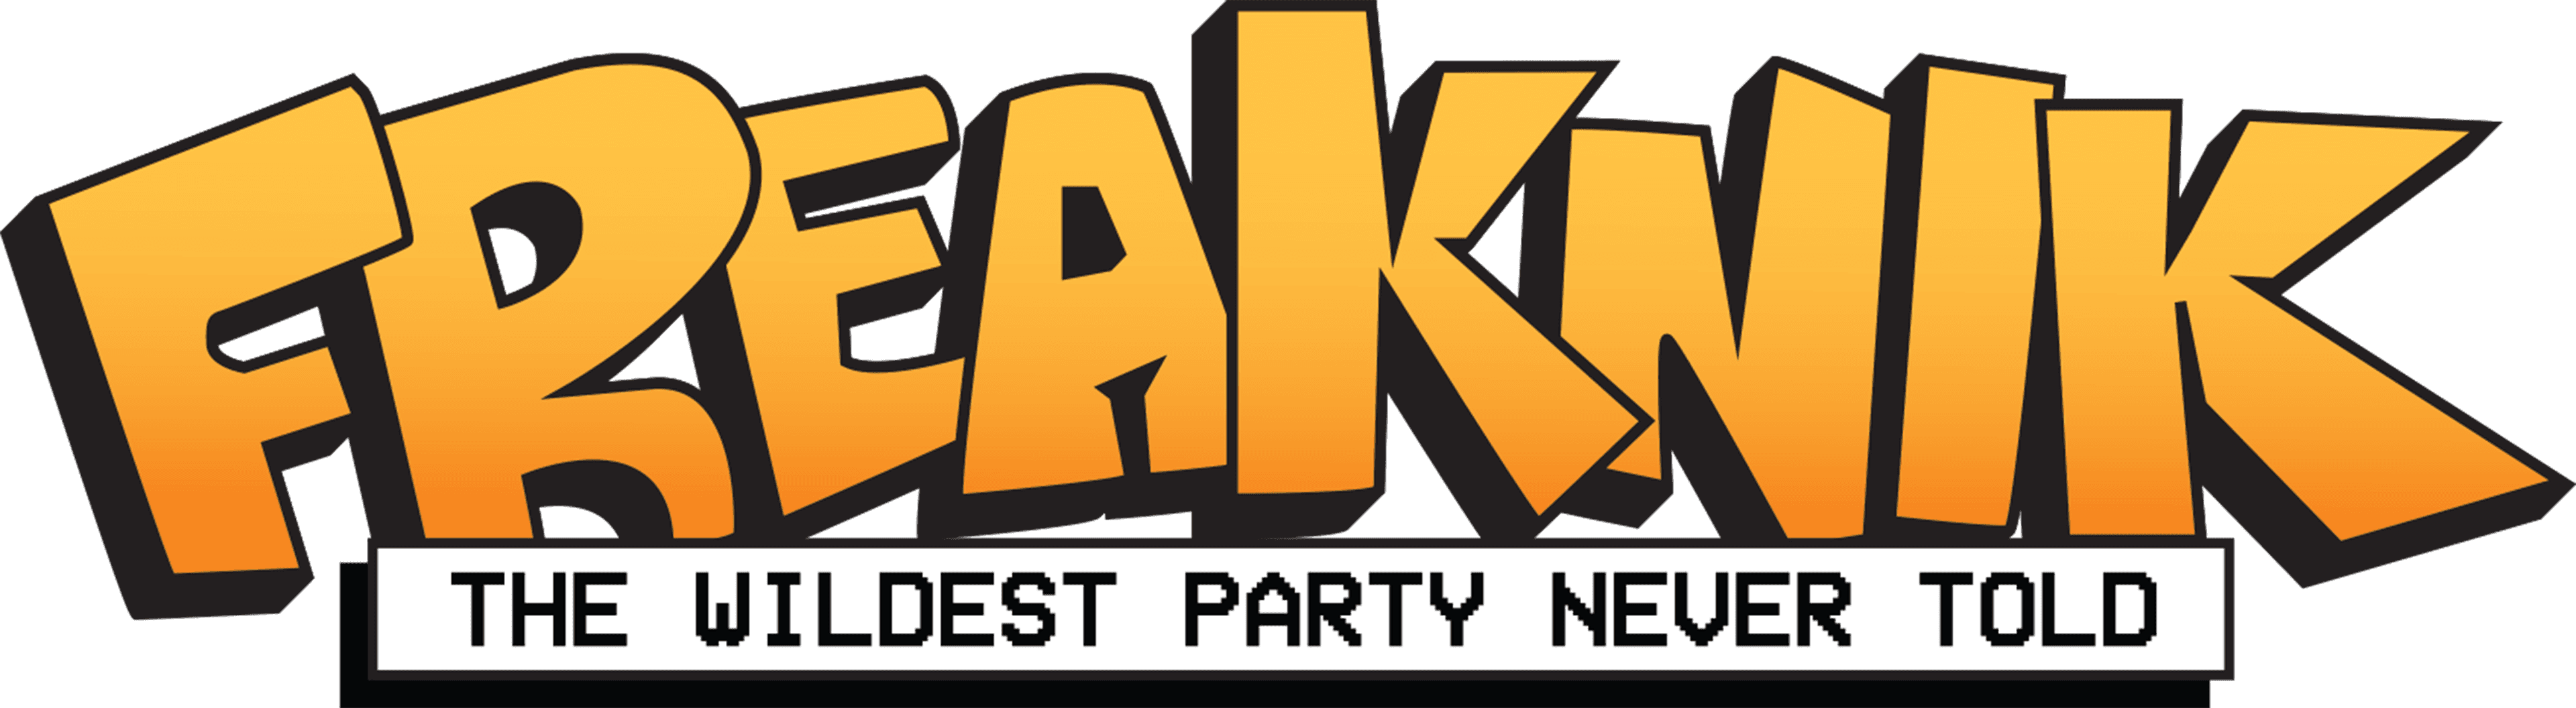 Freaknik: The Wildest Party Never Told logo